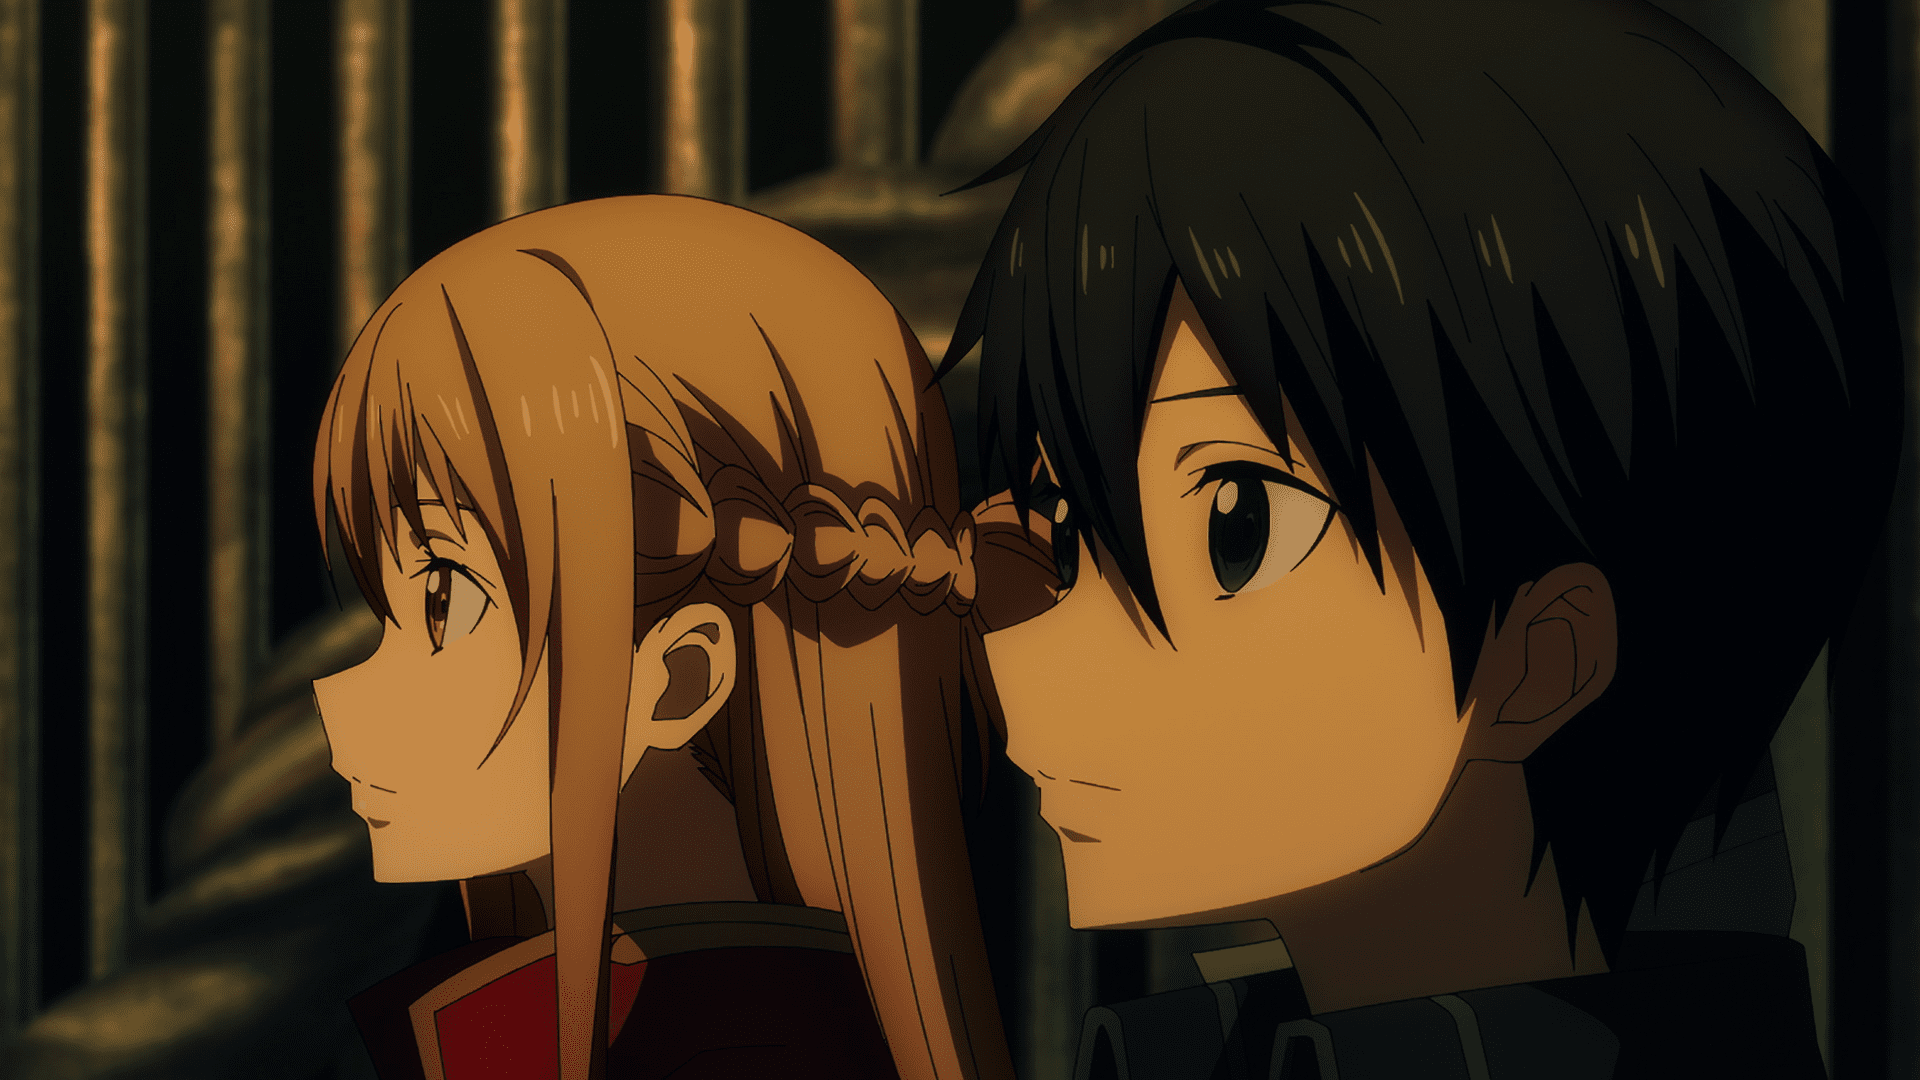 Sword Art Online Progressive – Anime Reviews and Lots of Other Stuff!